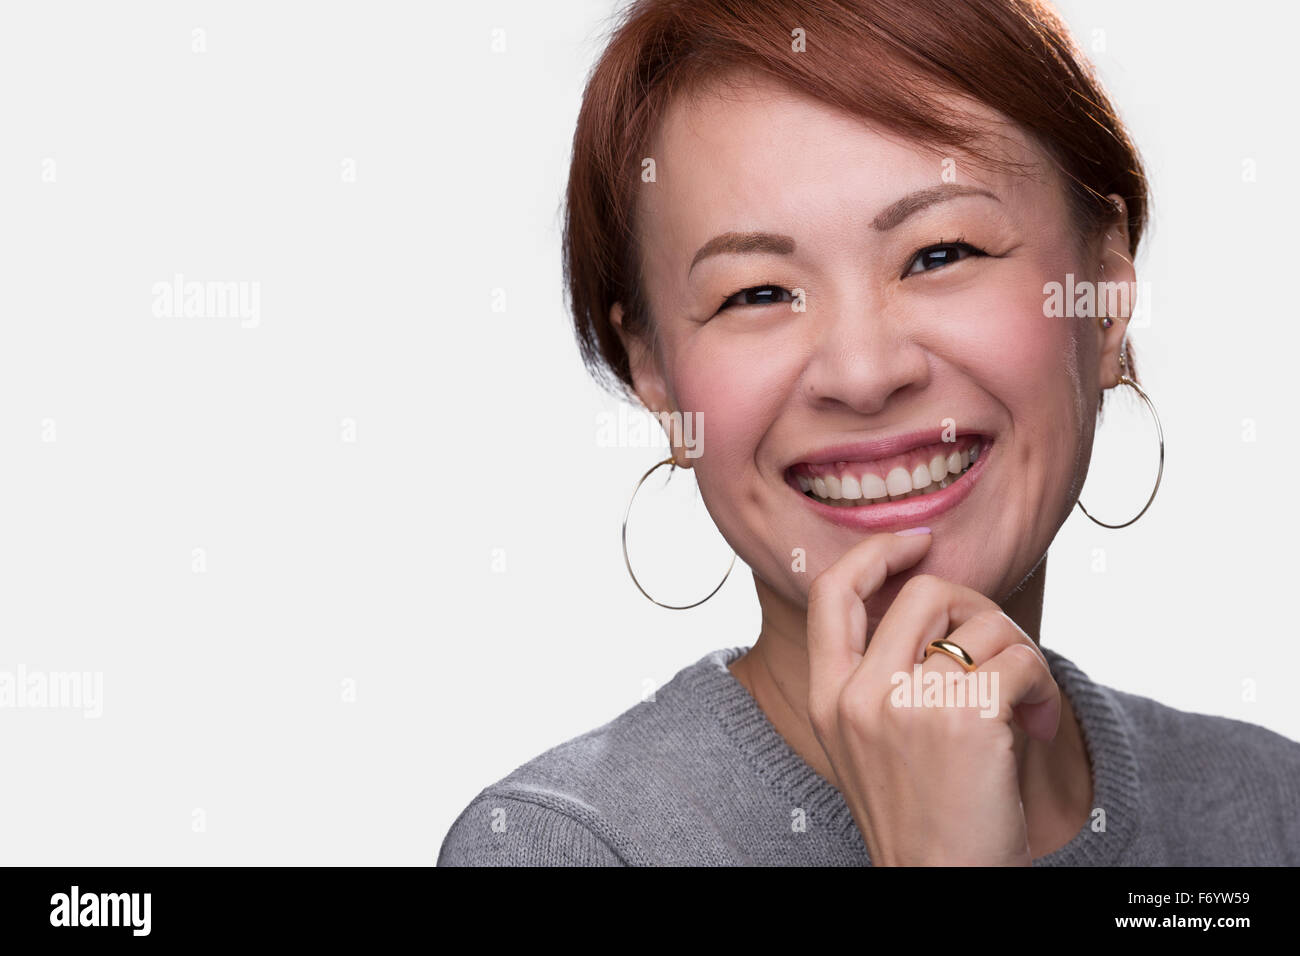 A headshot of a smiling middle aged Japanese woman on a white background. Stock Photo